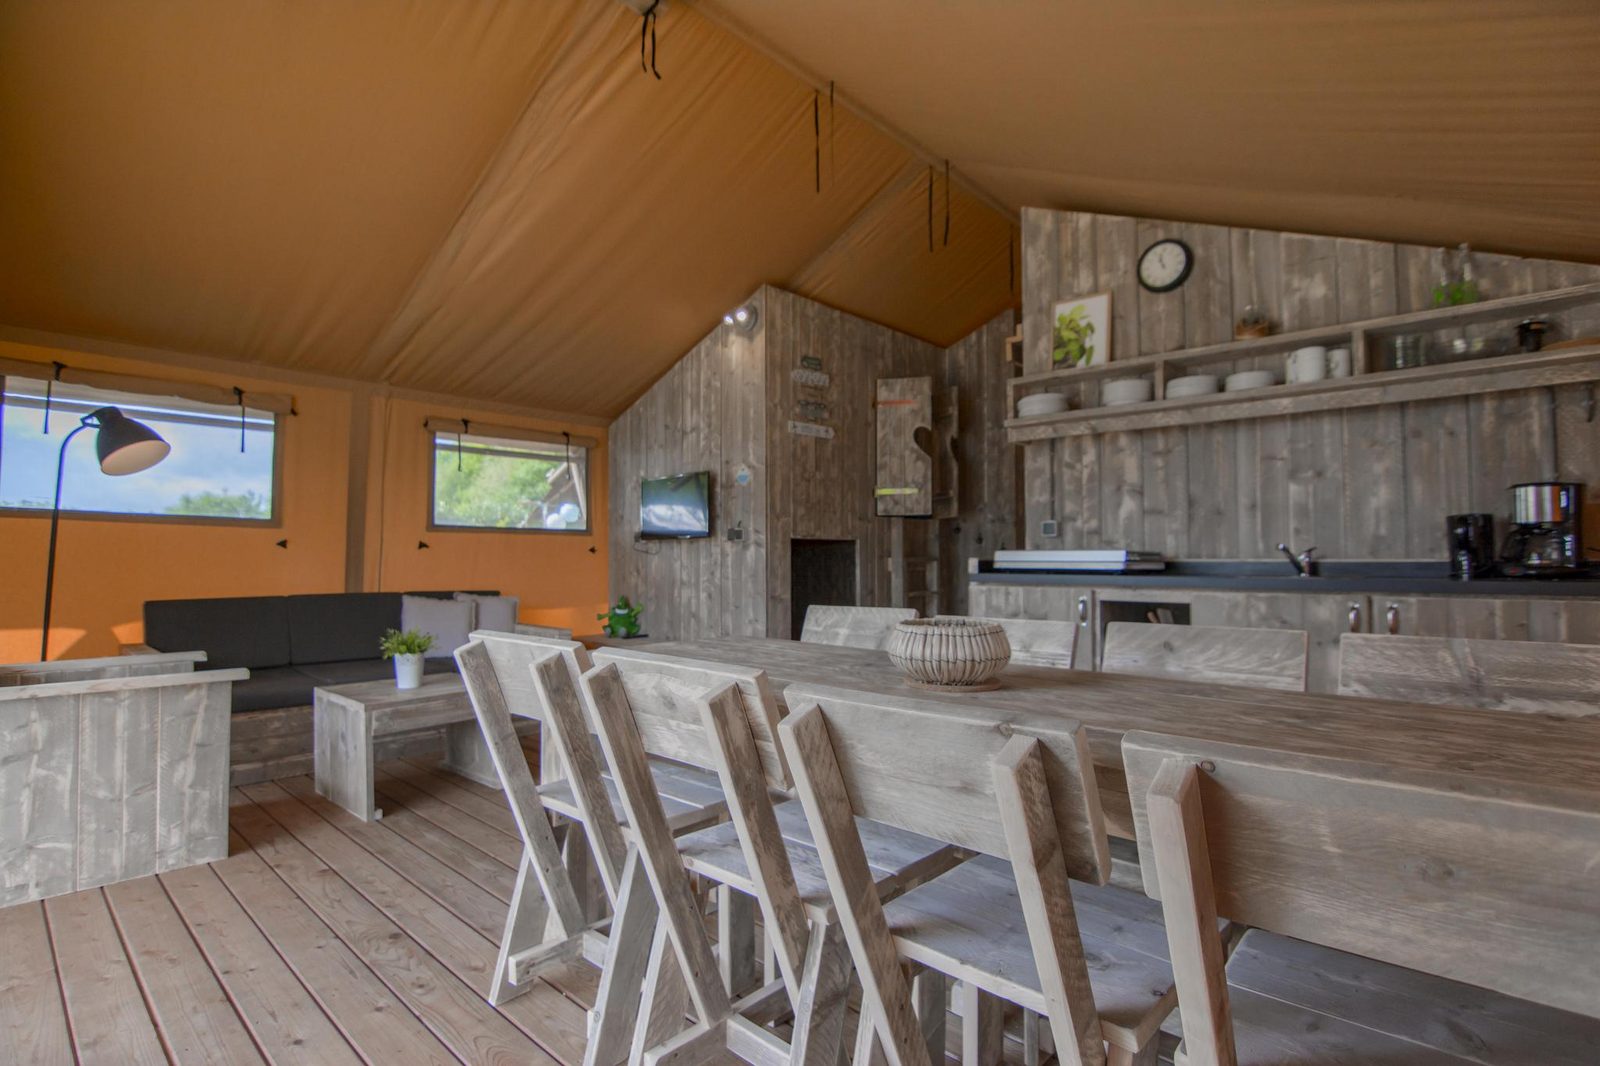 8-Person Woud-Lodge